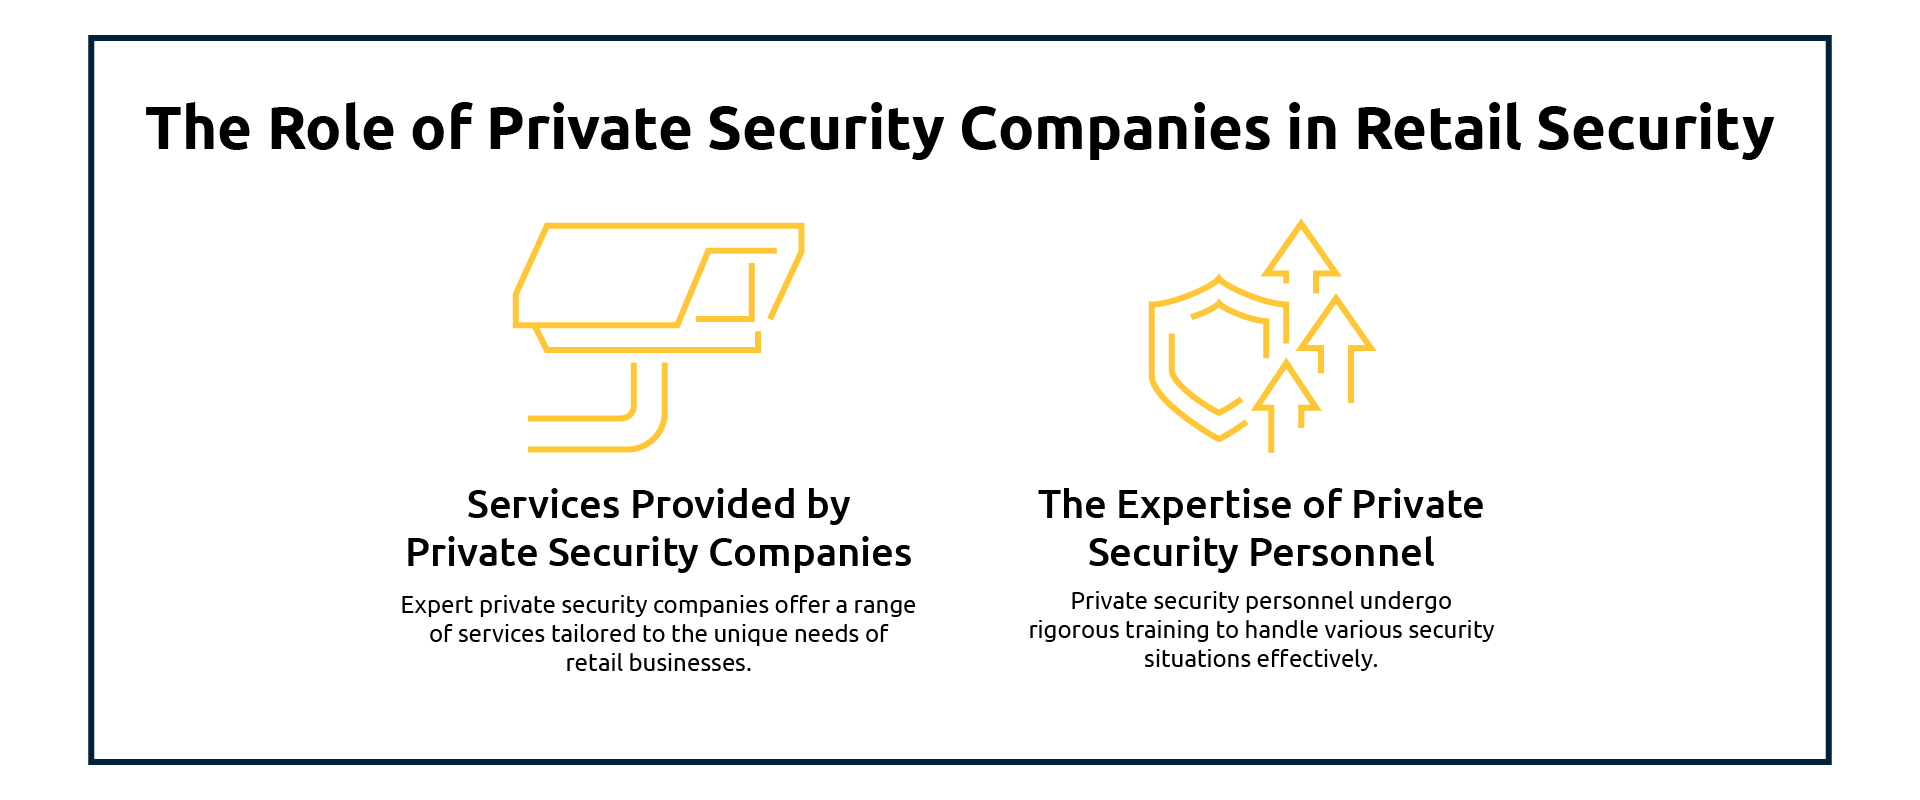 The Role of Private Security Companies in Retail Security